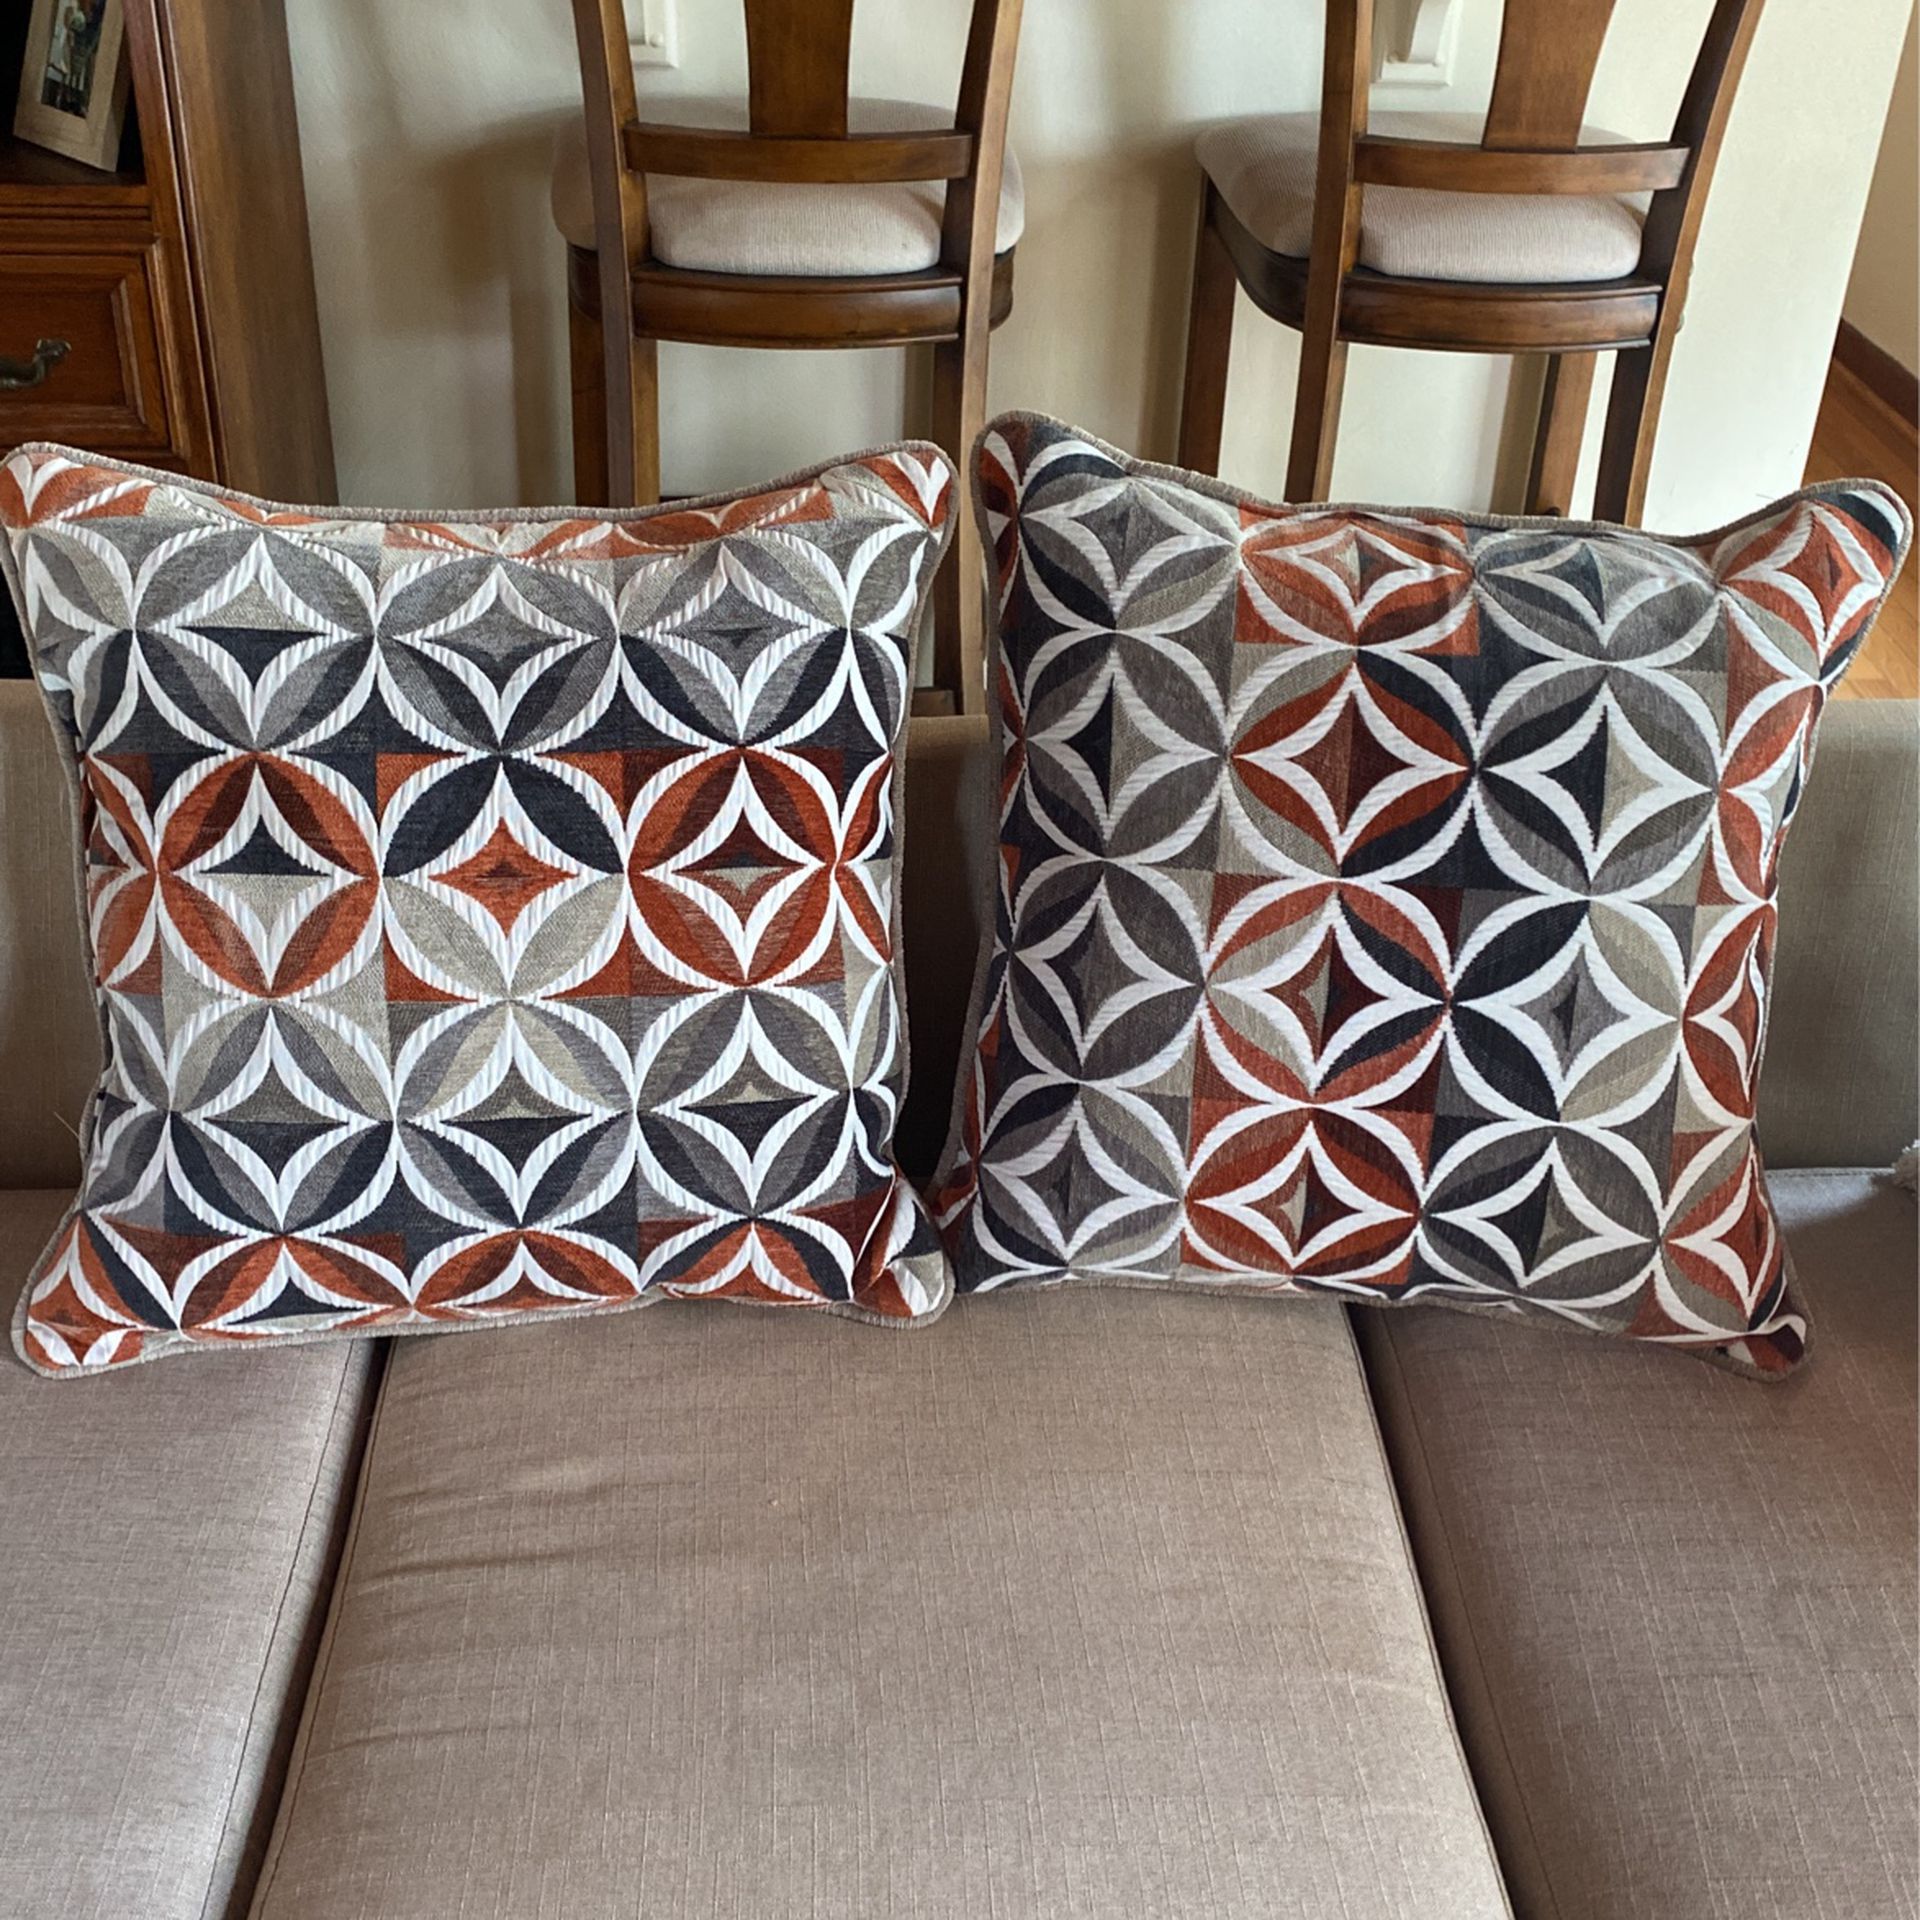 Two 20x20 Decorative Pillows 